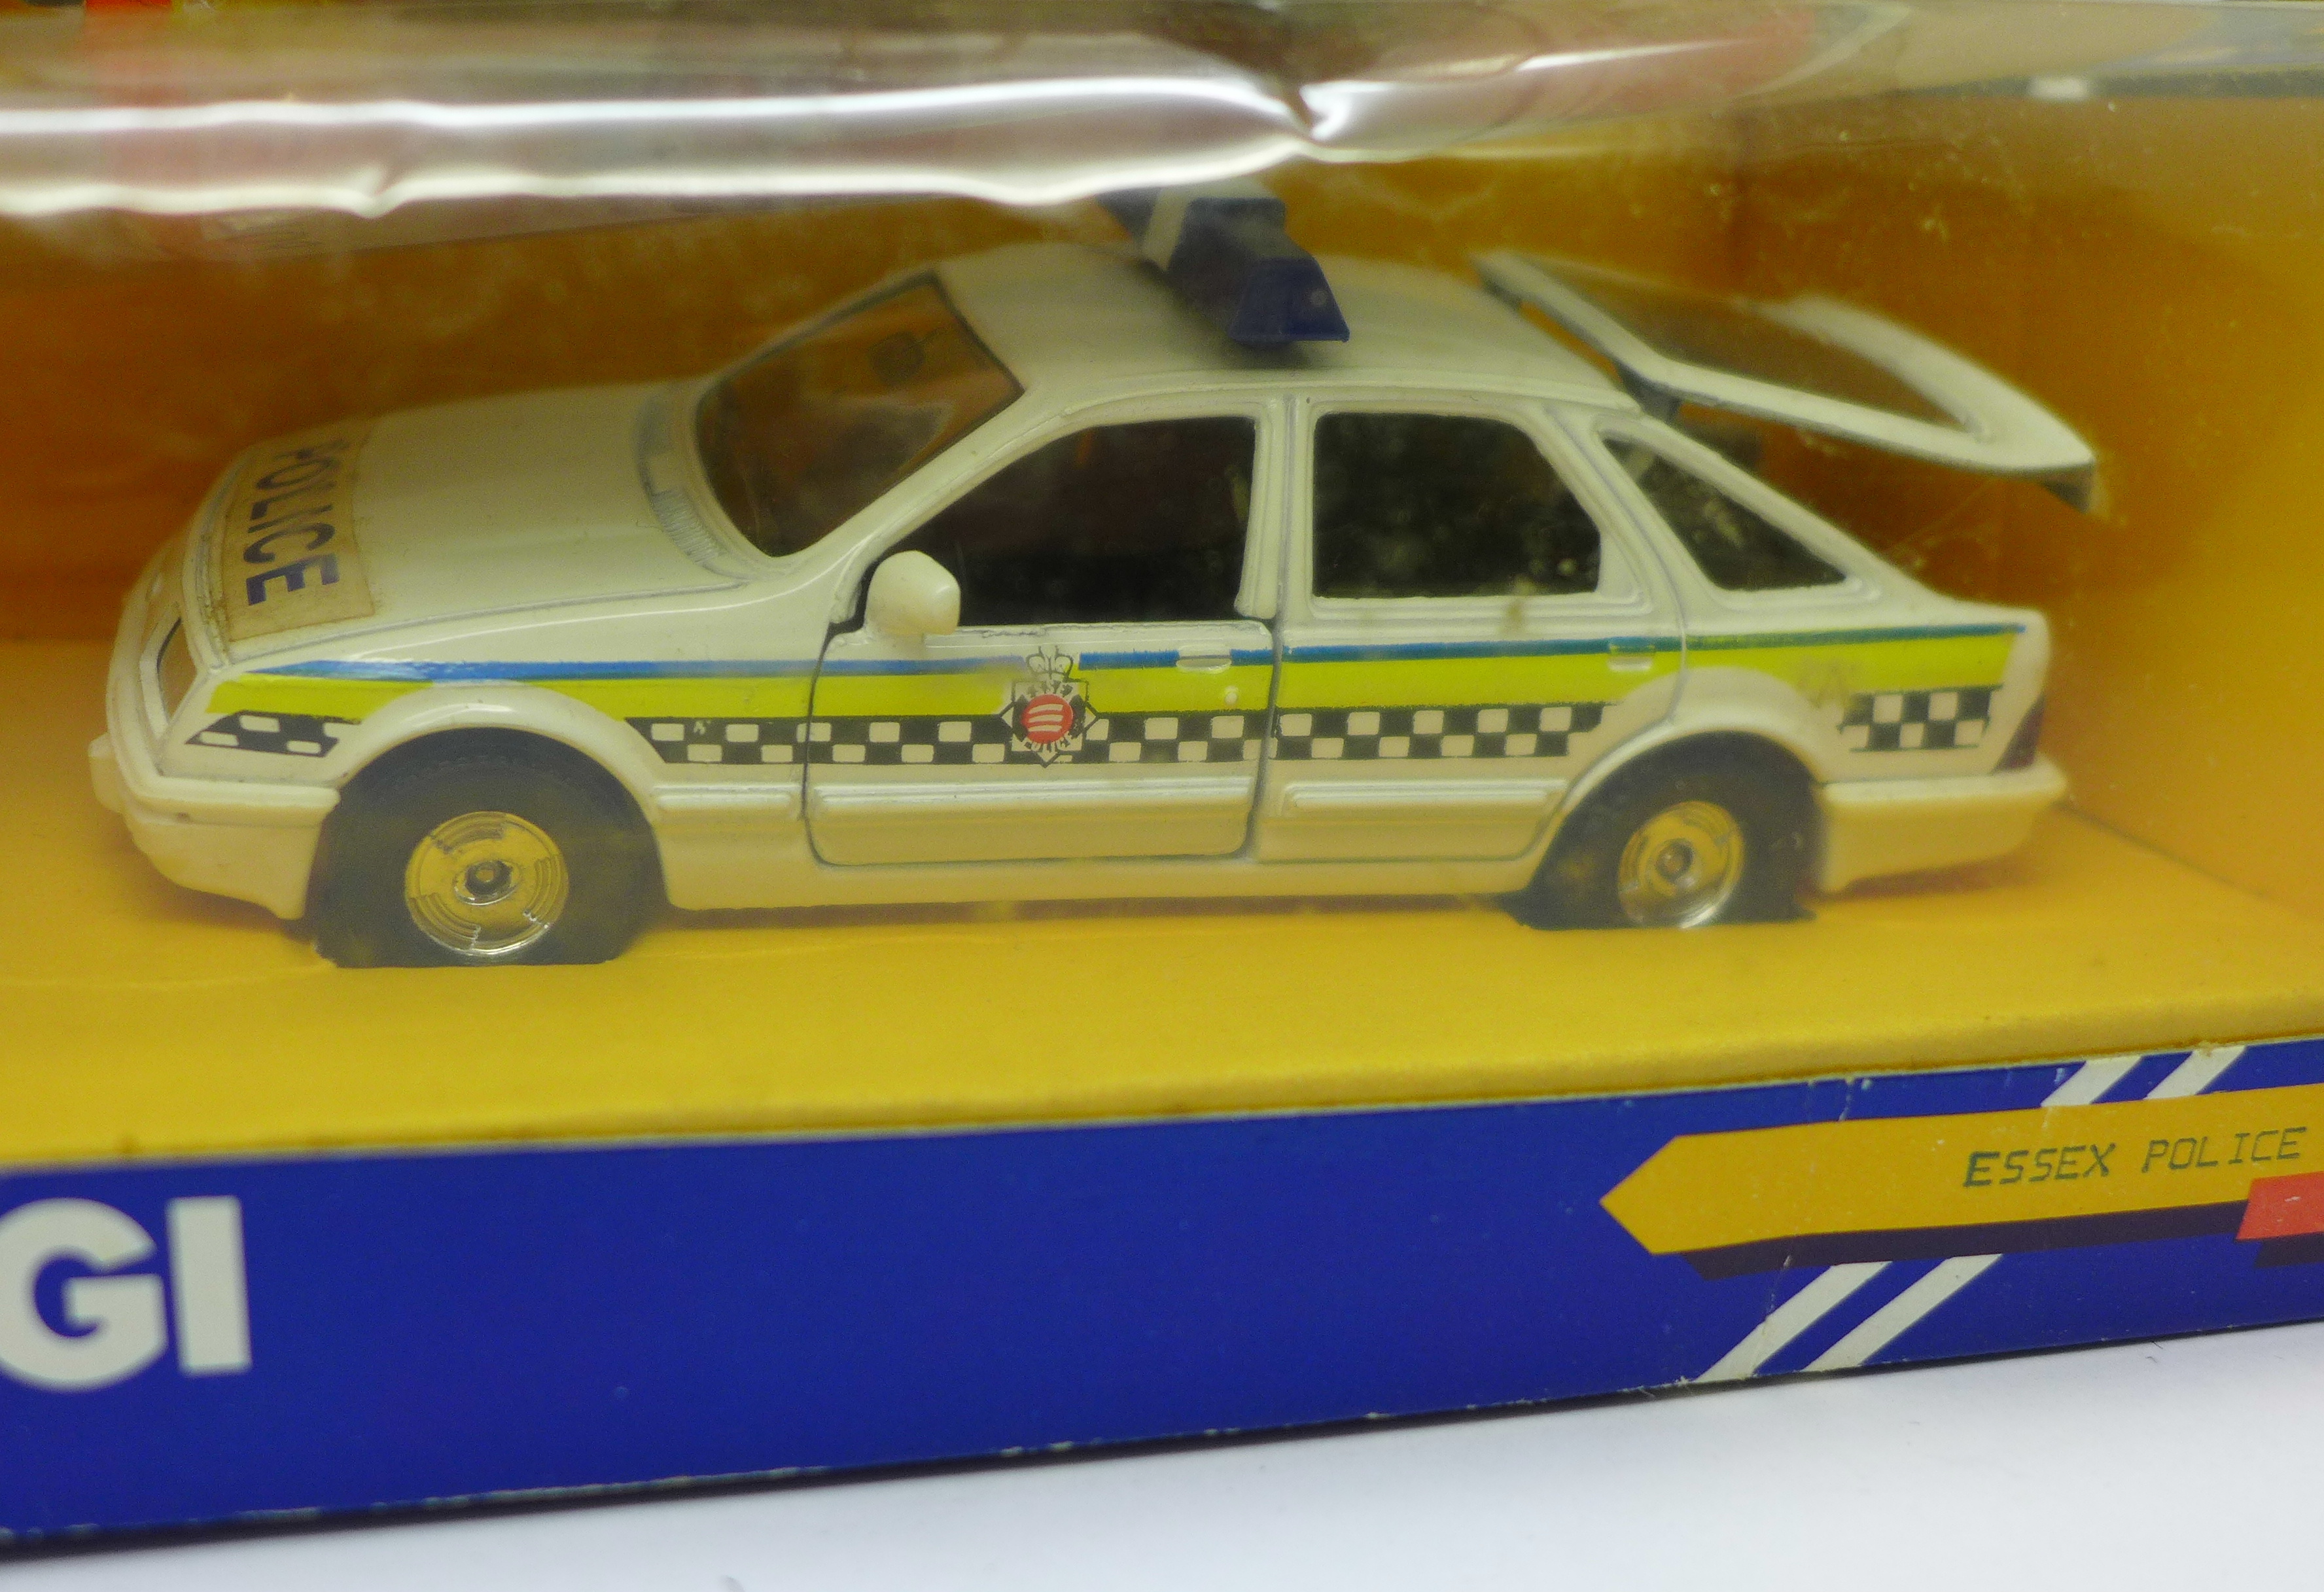 Four Corgi Toys die-cast model vehicles, including Rolls Royce Silver Shadow, in original boxes - Image 3 of 6